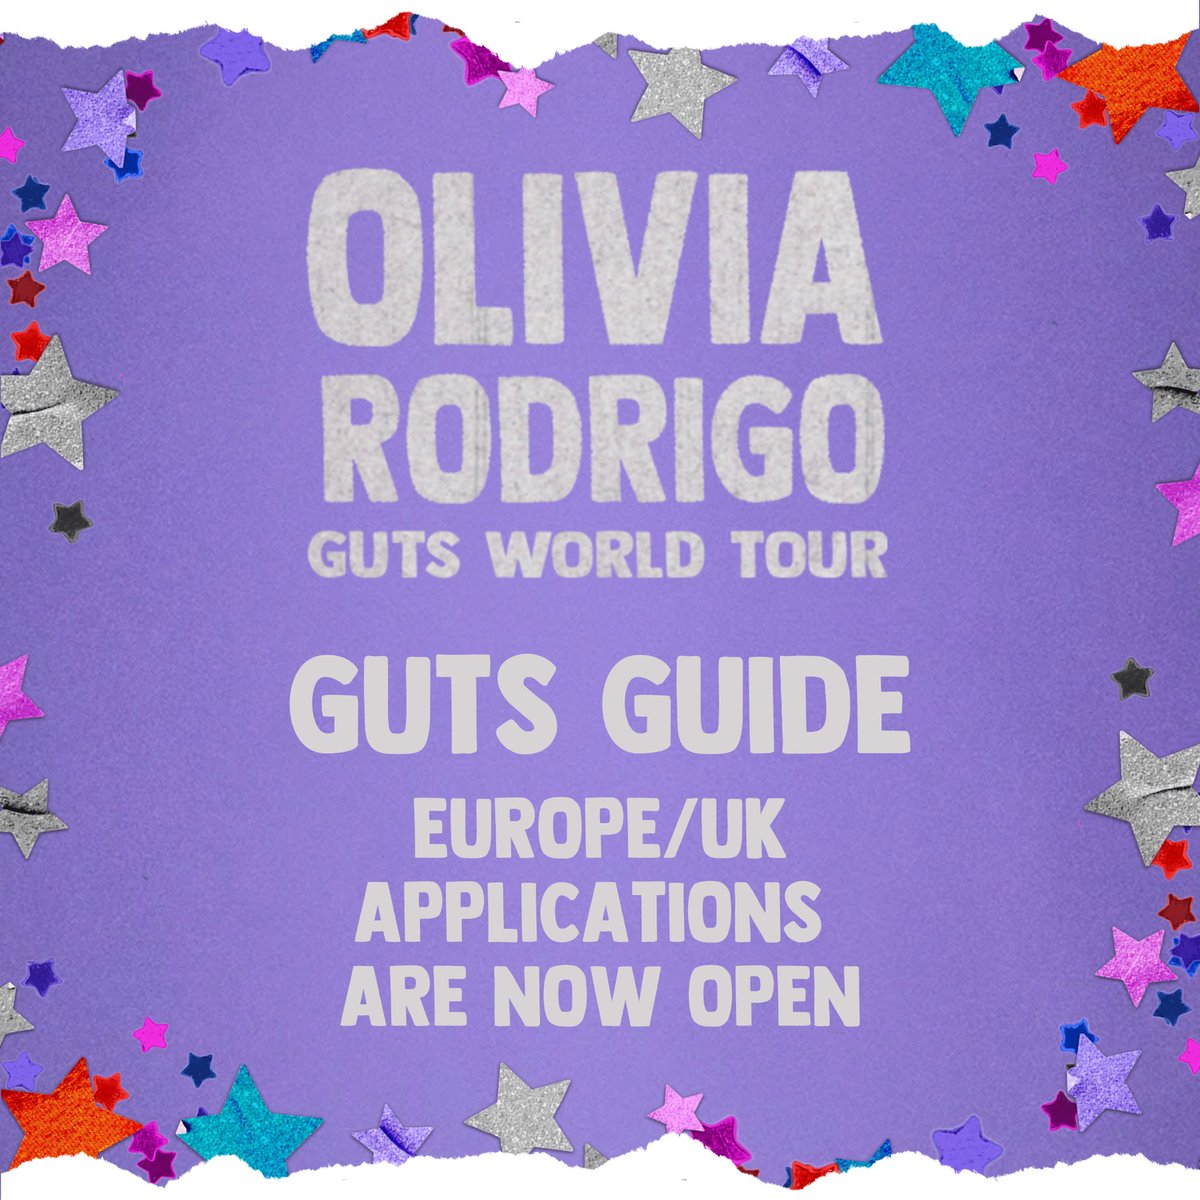 drumroll please…. 🥁🥁🥁 

GUTS guide applications are now open for all europe/uk #GUTSWorldTour shows!!!

please fill out the form below & carefully read the description for more information 💜

(applications for the rest of the tour will be available at a later date)